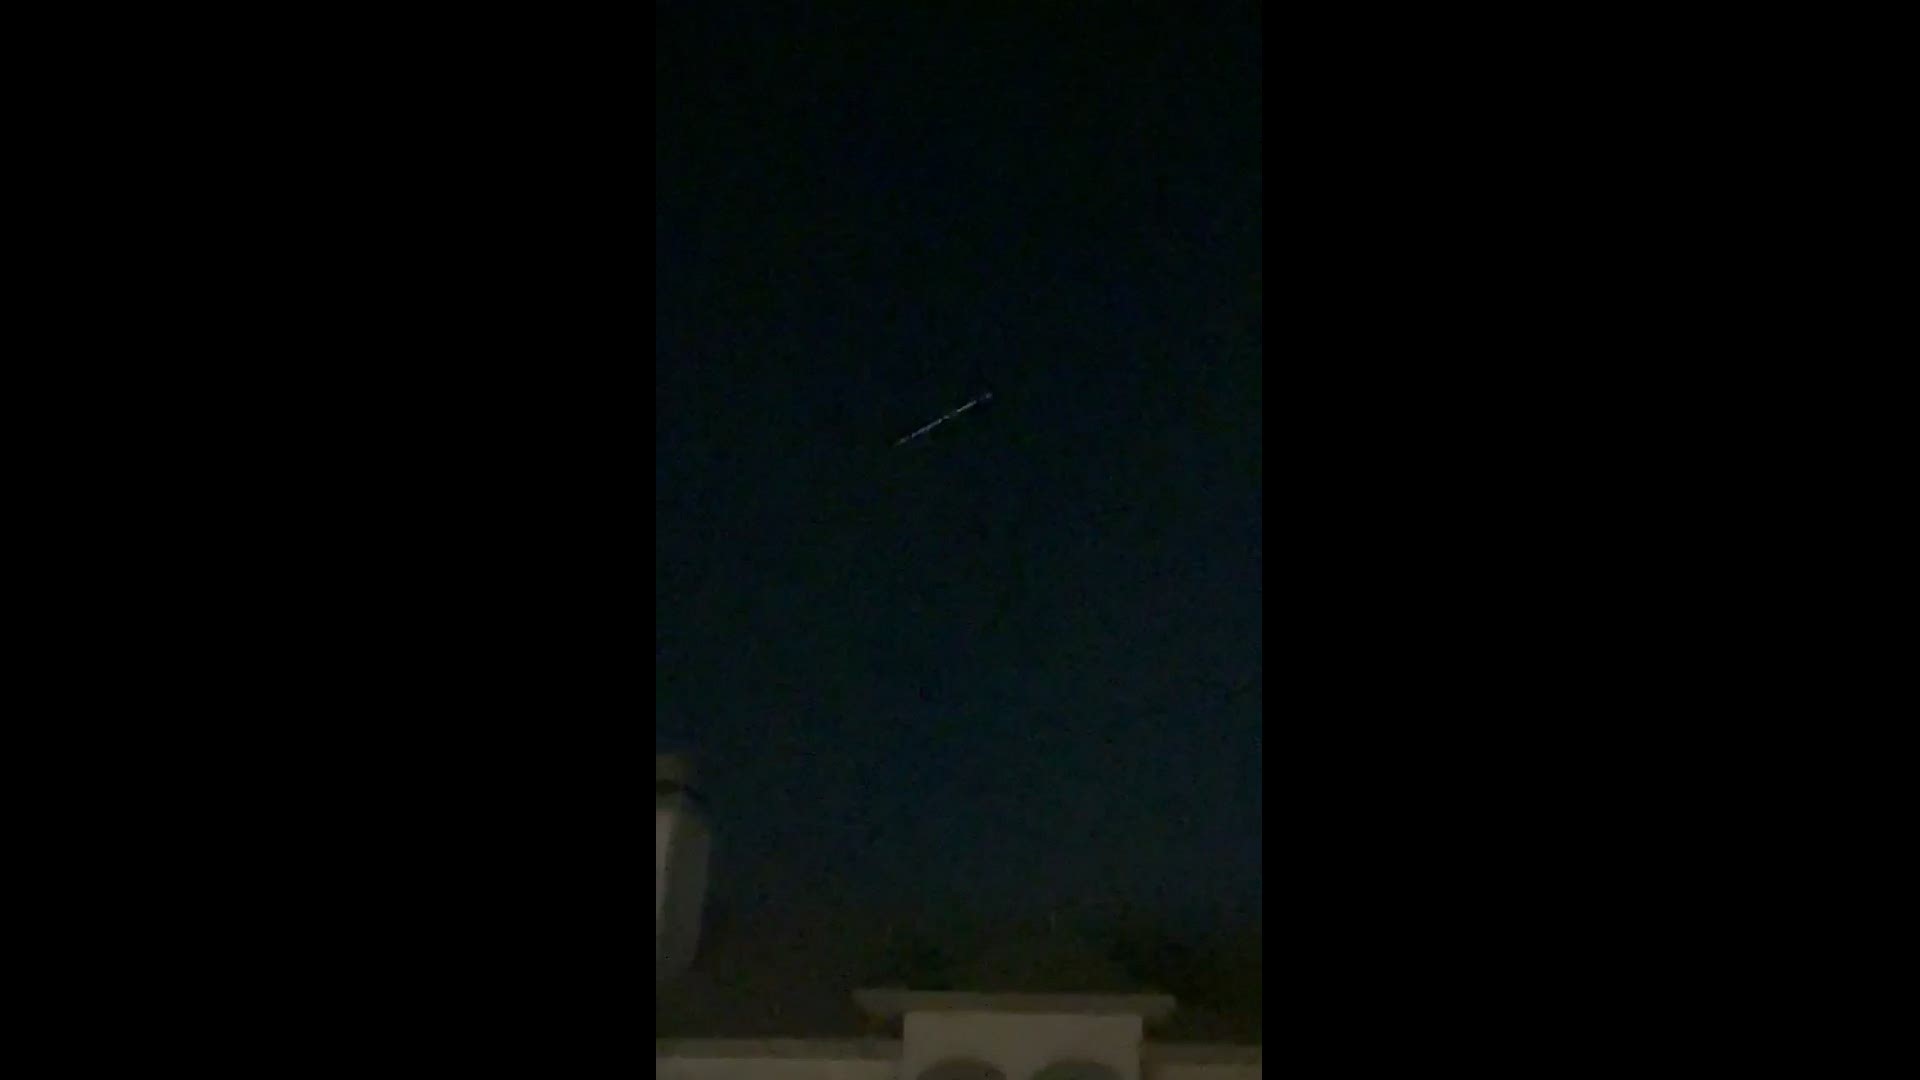 Lights were spotted trailing over Austin April 7, and it's believed they were Starlink satellites from Elon Musk's SpaceX. Lisa Kiehl sent this video to KVUE.